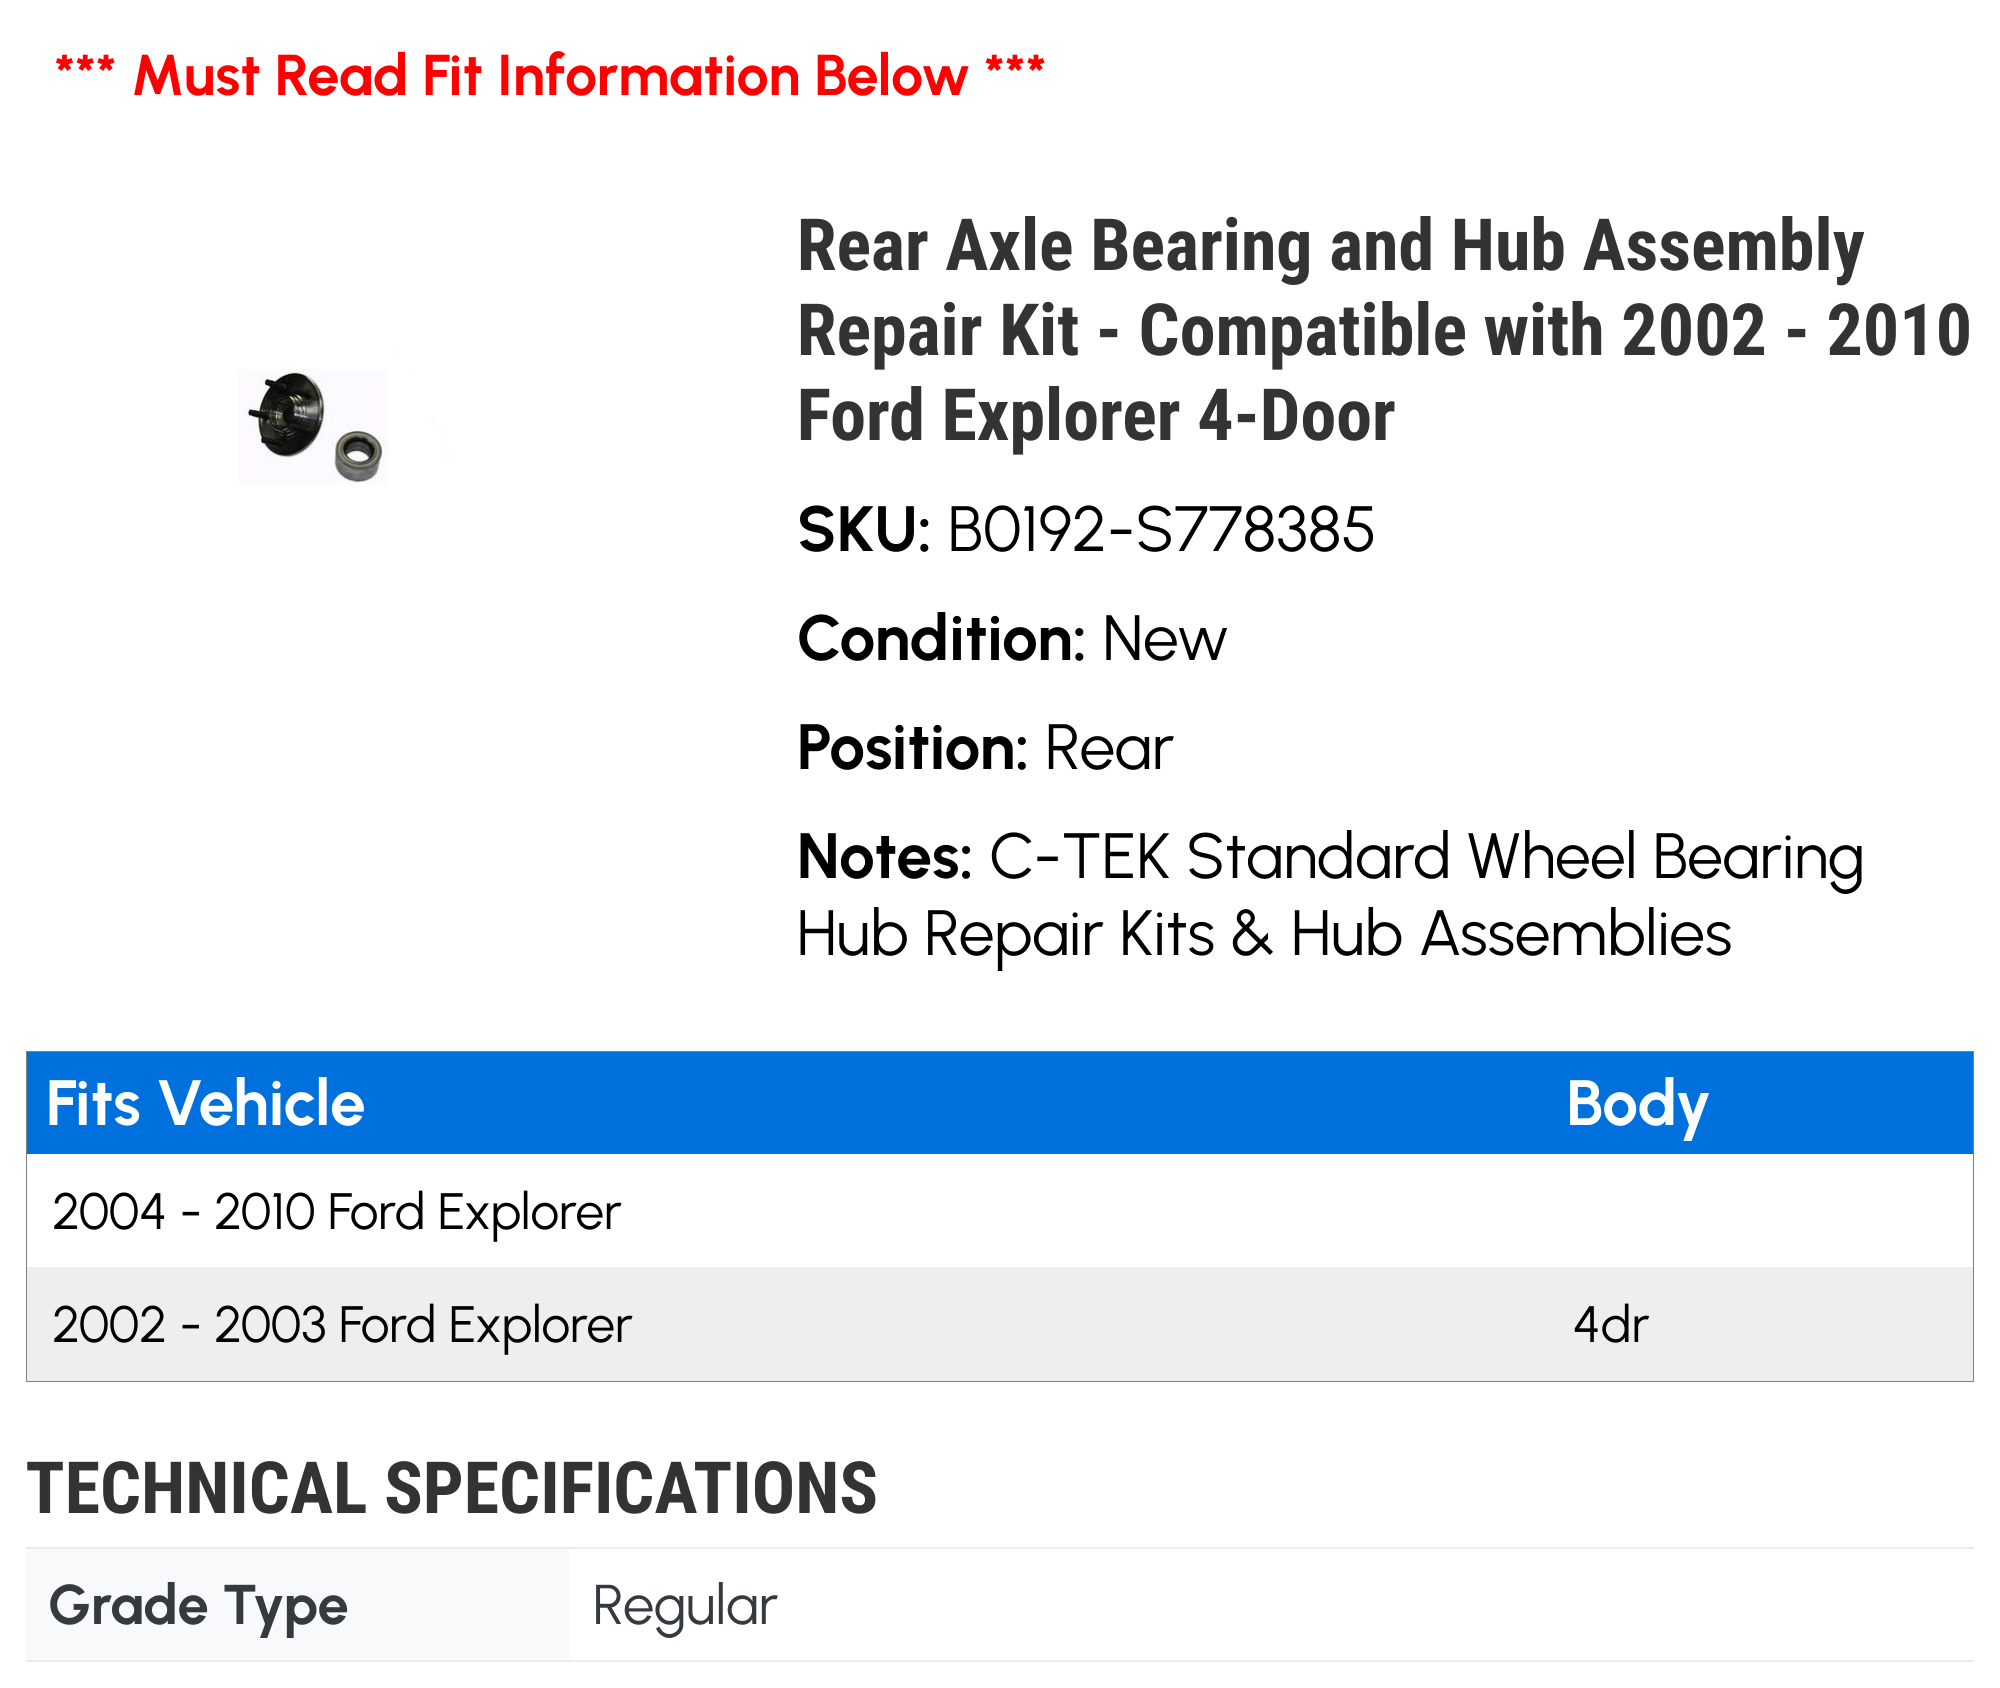 Rear Axle Bearing and Hub Assembly Repair Kit - Compatible with 2002 - 2010 Ford Explorer 4-Door 2003 2004 2005 2006 2007 2008 2009 - image 2 of 2